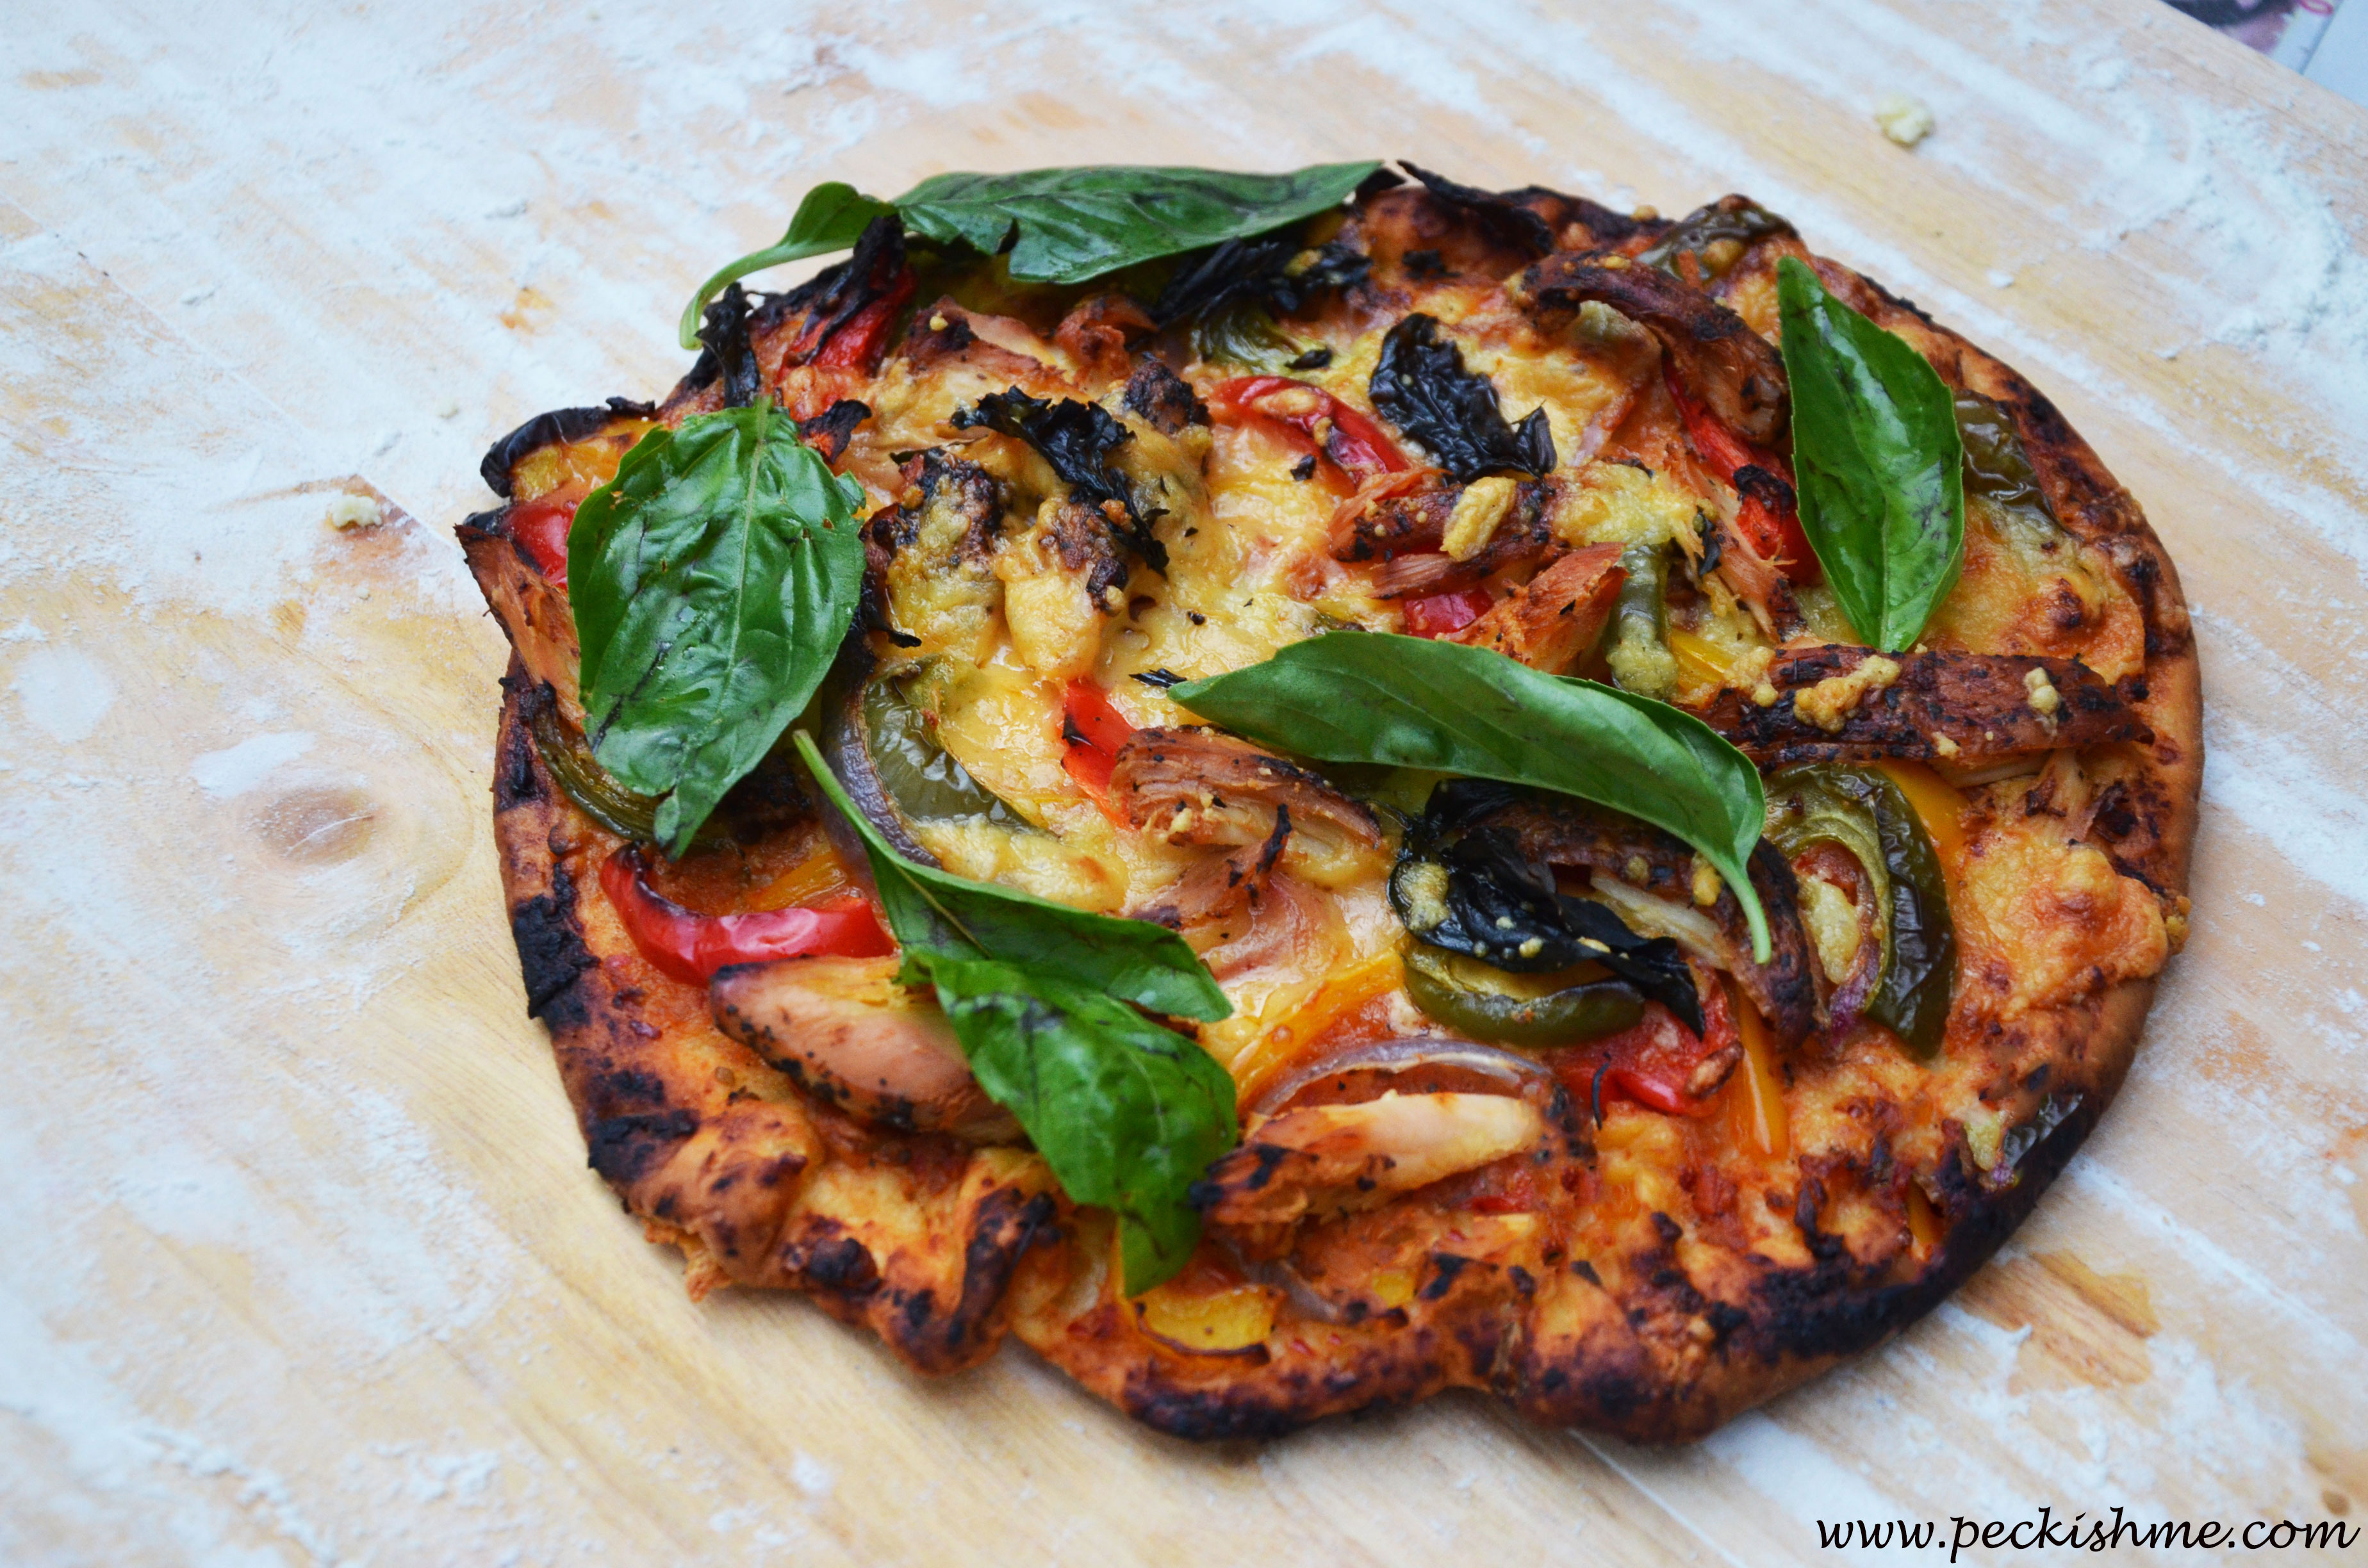 Homemade pizza - A guide | Peckish Me